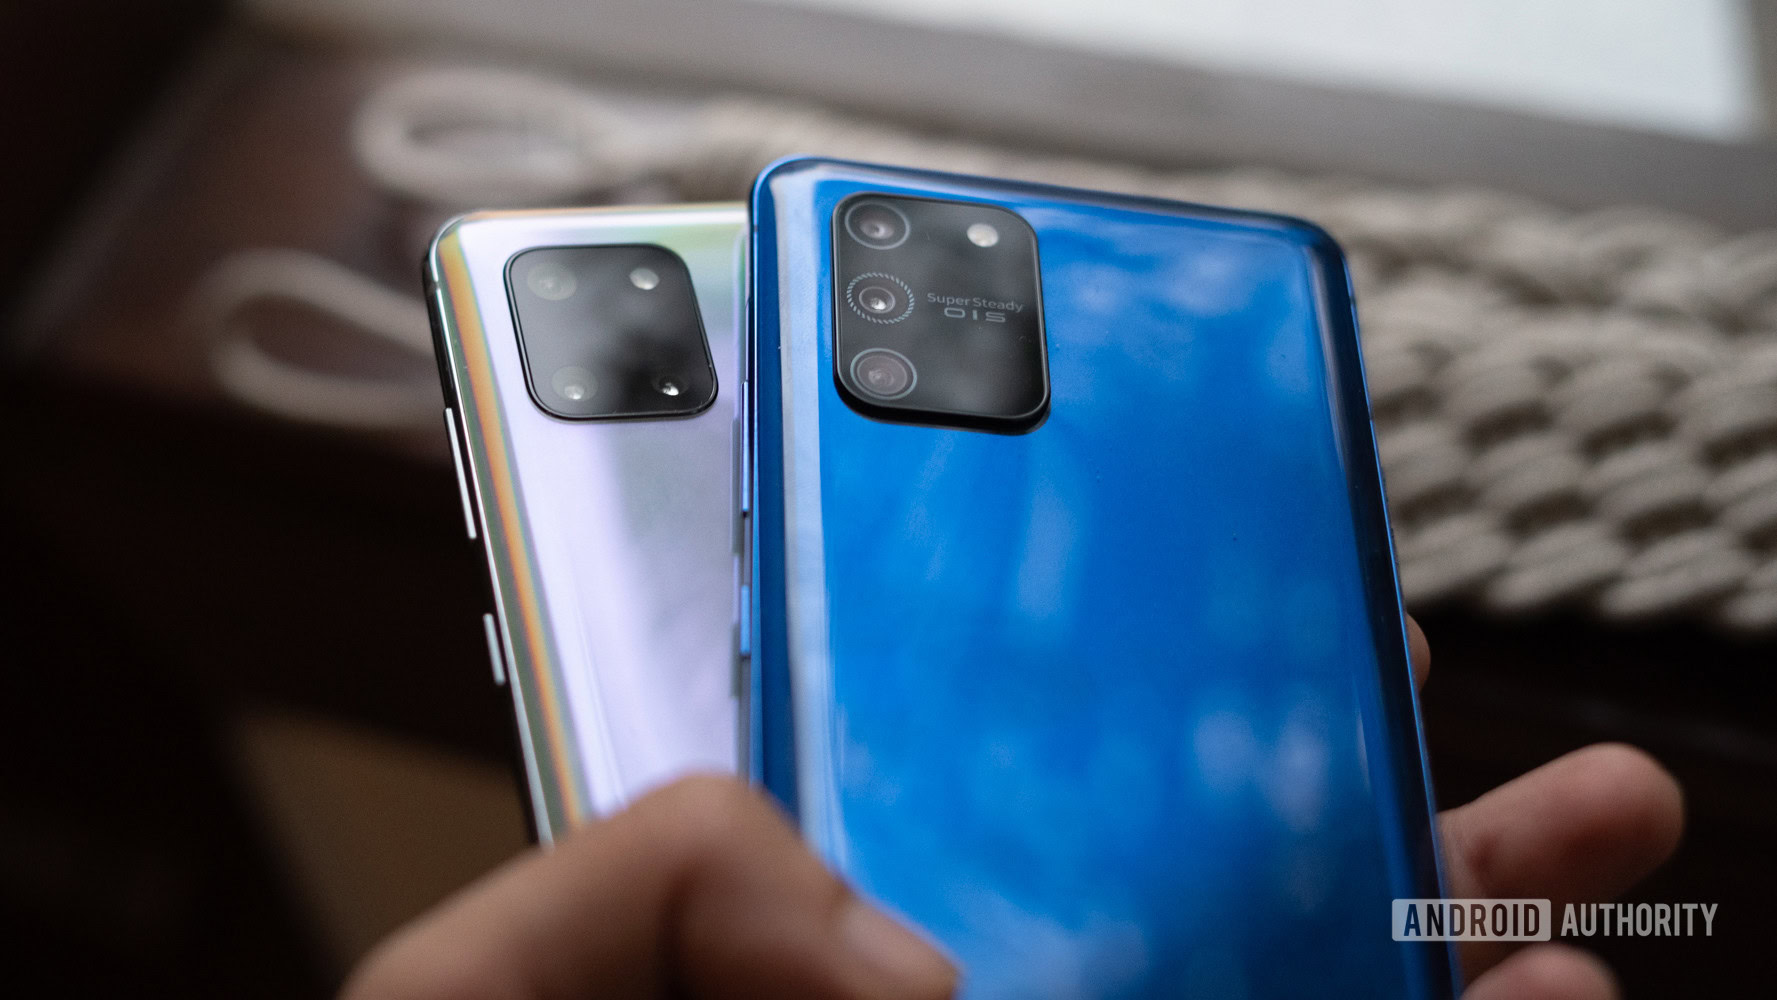 Hands-on with Samsung Lite: Galaxy Note 10 and S10 push prices and features  south - CNET